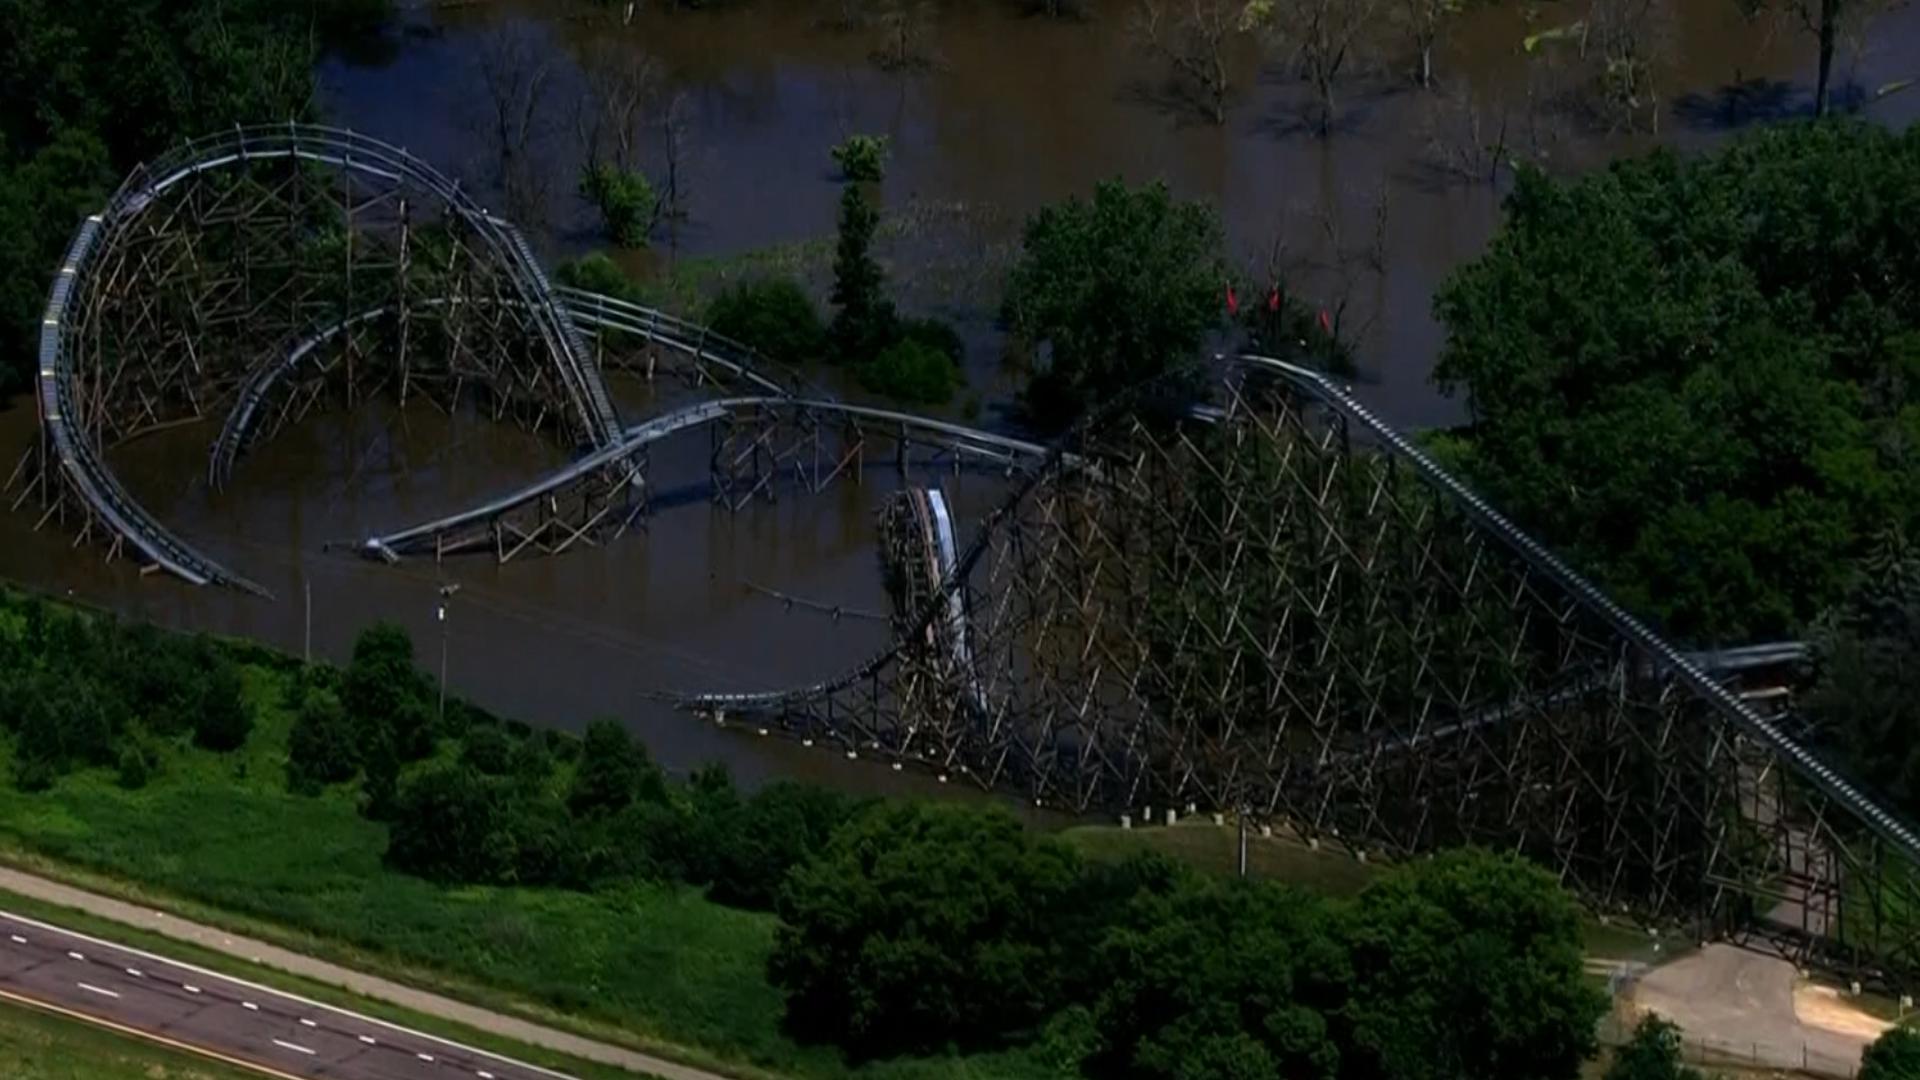 No, that’s not Soak City… floodwaters shuttered portions of the Shakopee theme park on Tuesday.